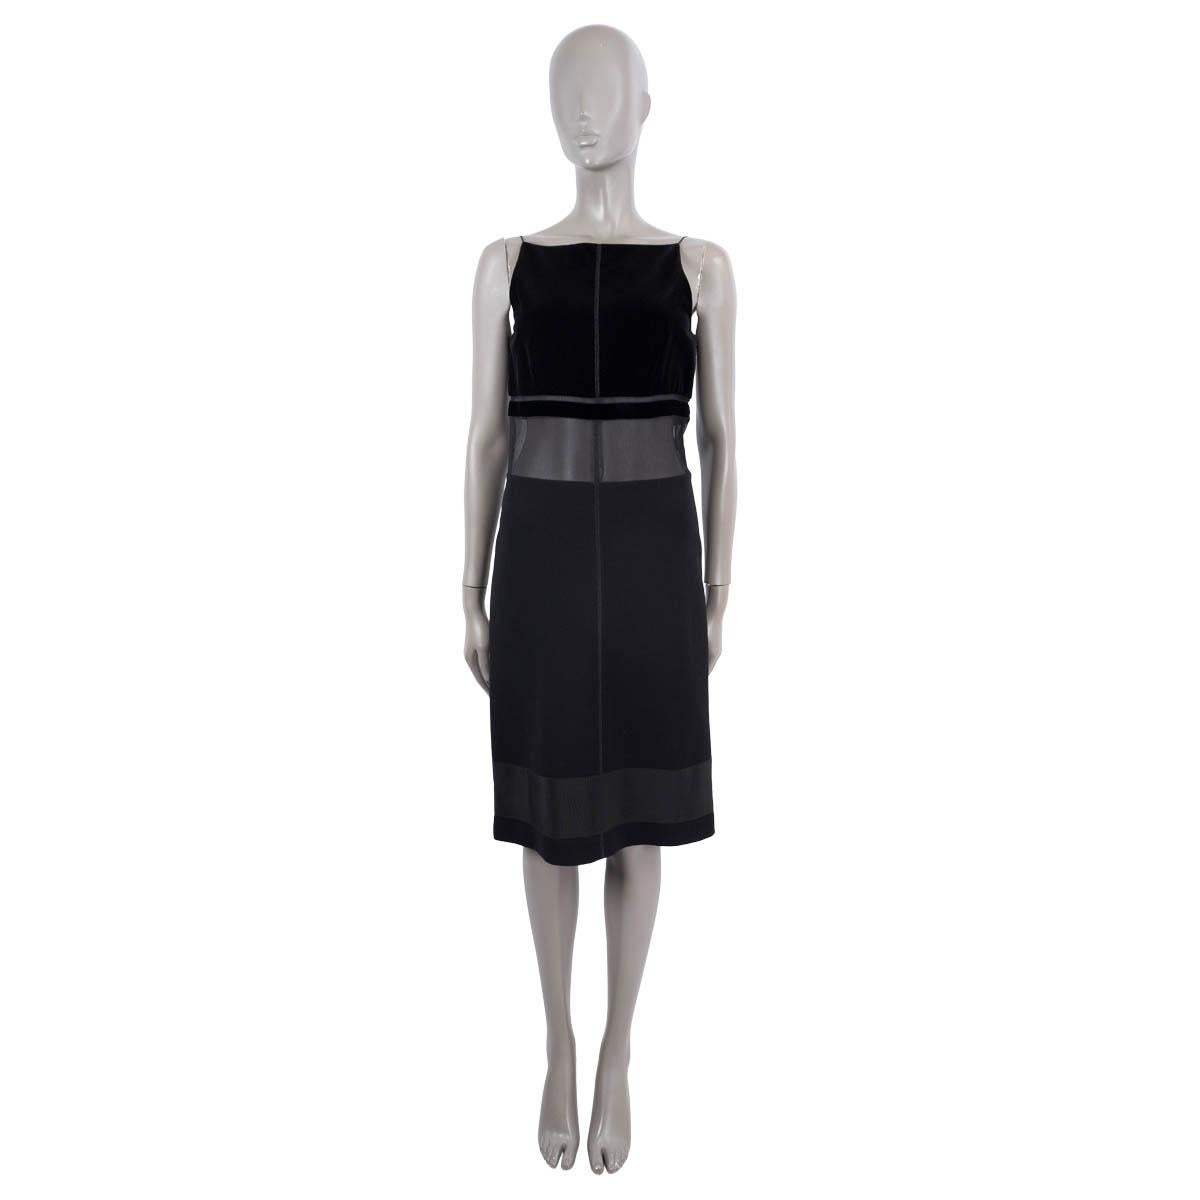 100% authentic Prada sleeveless cocktail dress in black velvet cotton (100%) and skirt part in wool (100%). The design features spaghetti straps, a black grosgrain band on the hem and on the back embellished with a flat bow, sheer panelled details